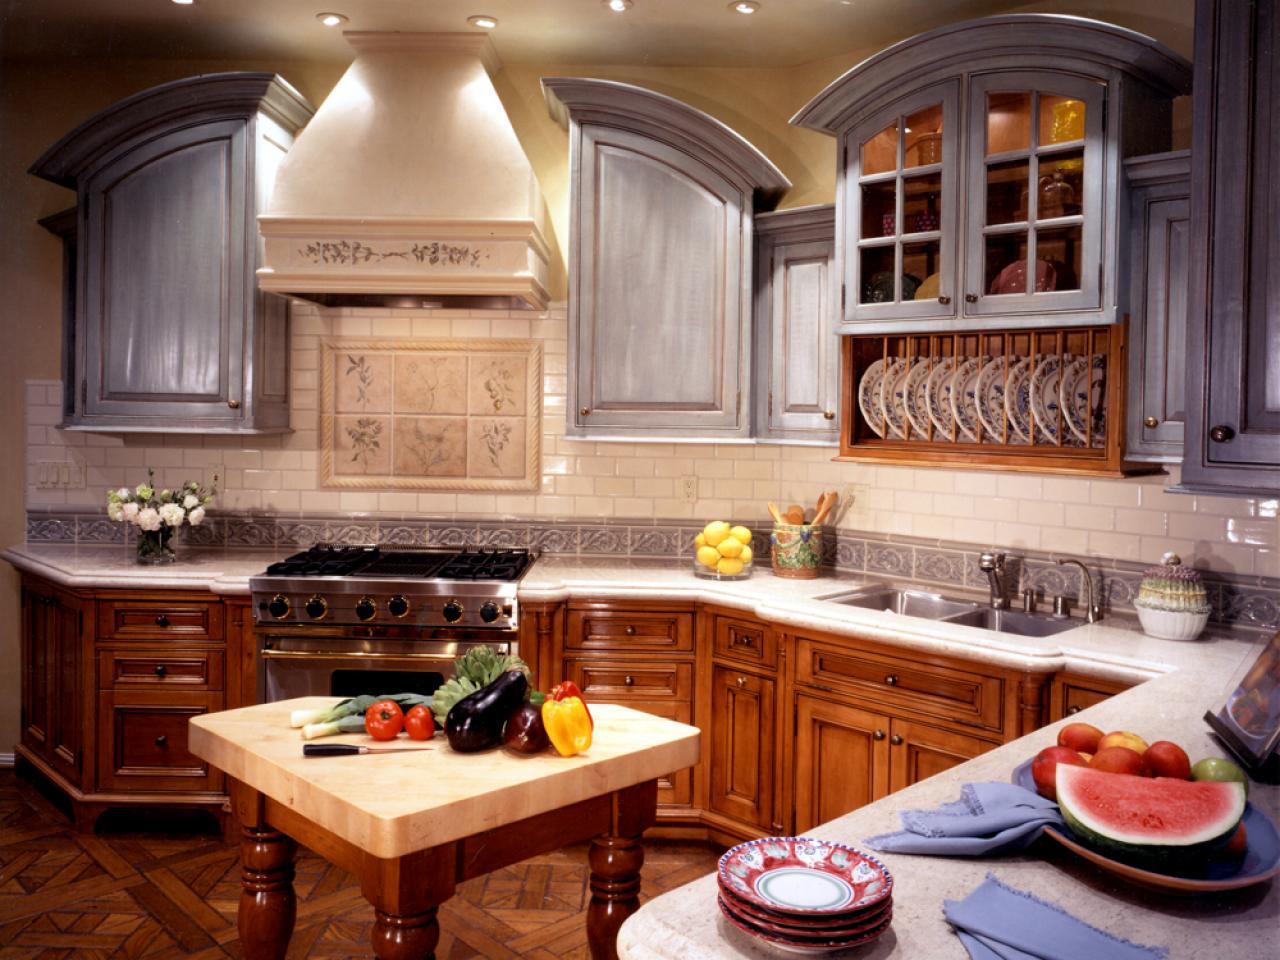 Mixing Kitchen Cabinet Styles and Finishes | Kitchen Ideas ...